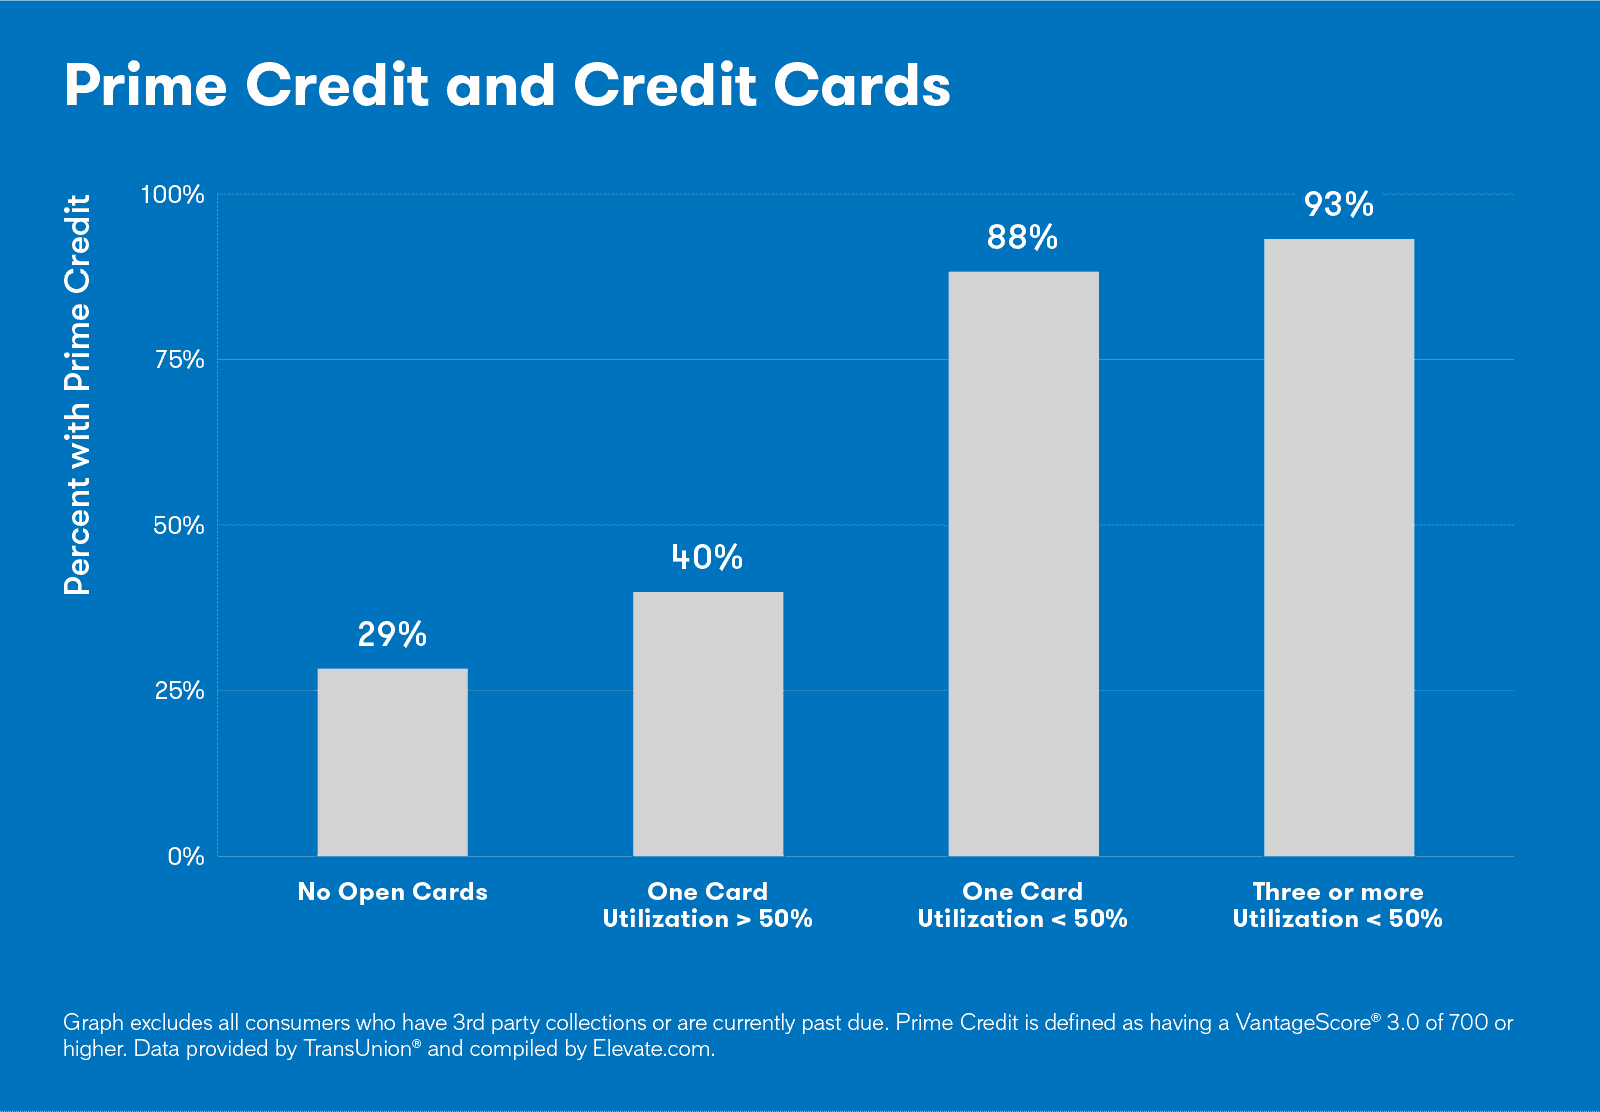 This graph show the relationship between the number of credit cards open and having a prime credit score